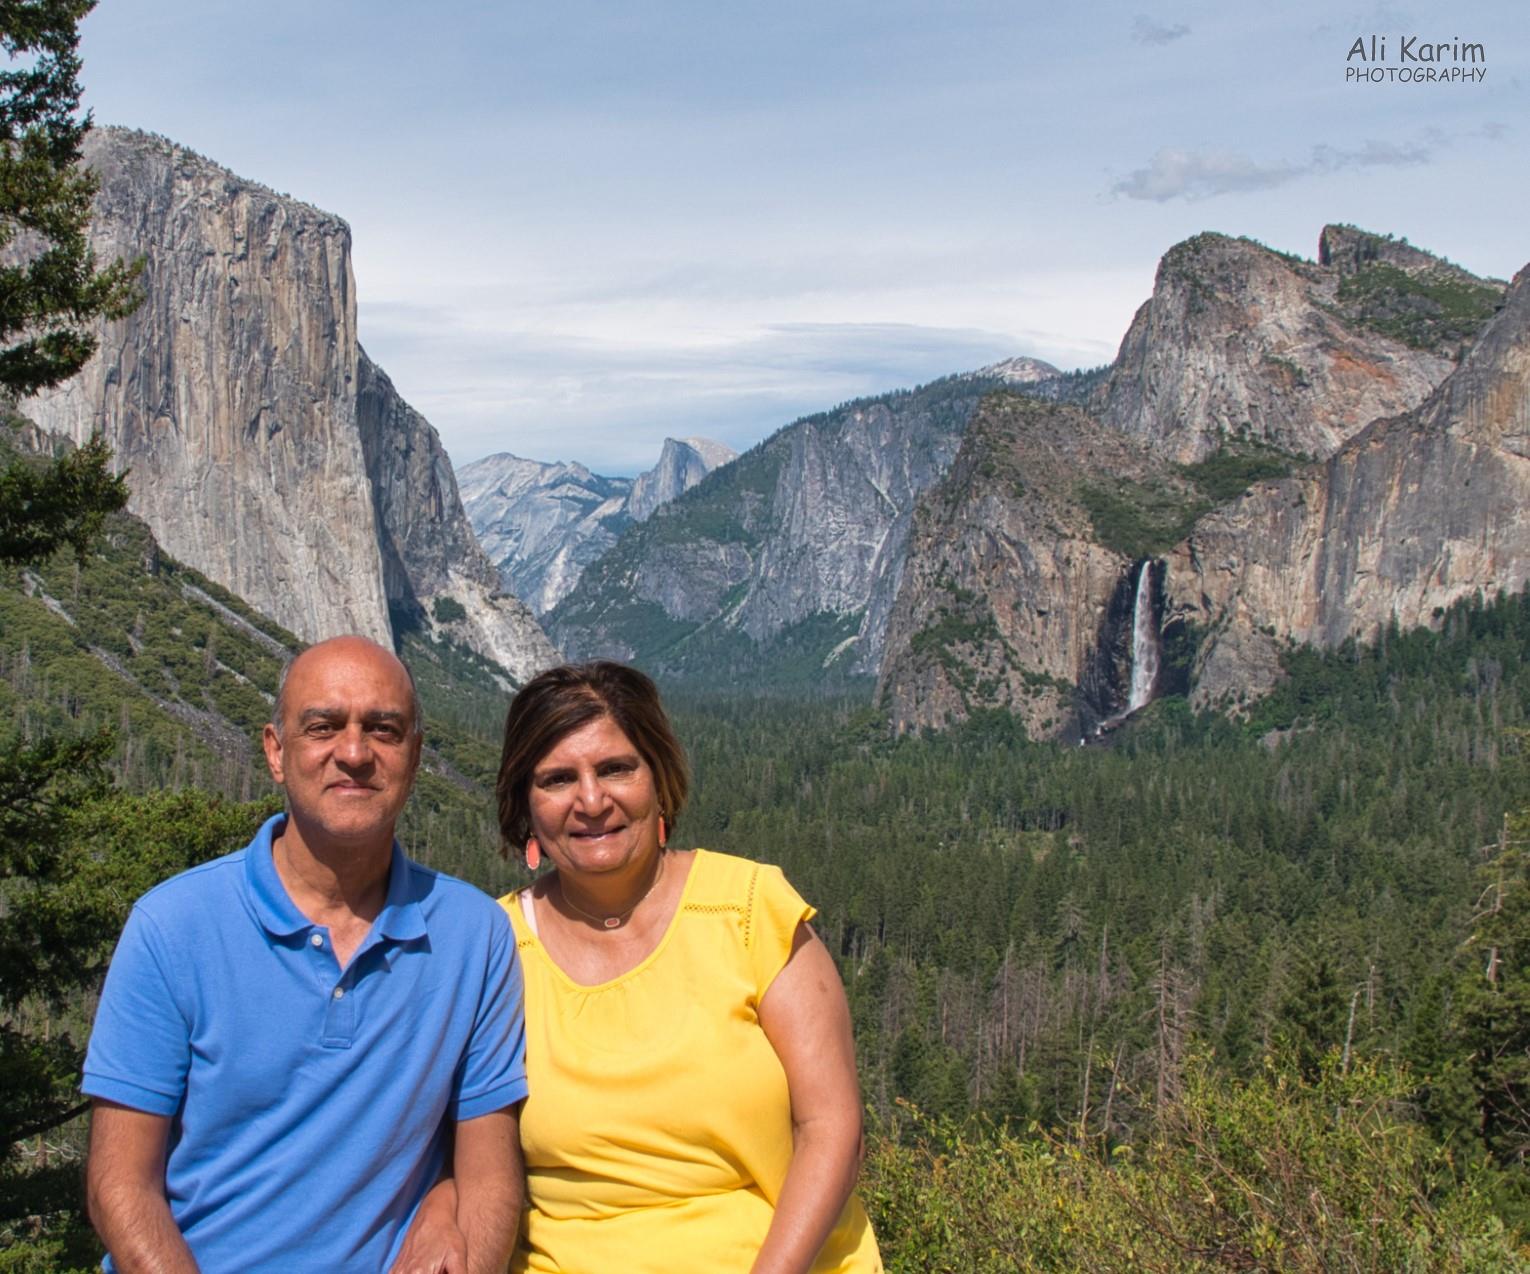 Yosemite & Death Valley, June 2020, Beautiful Yosemite valley with all major scenic points behind